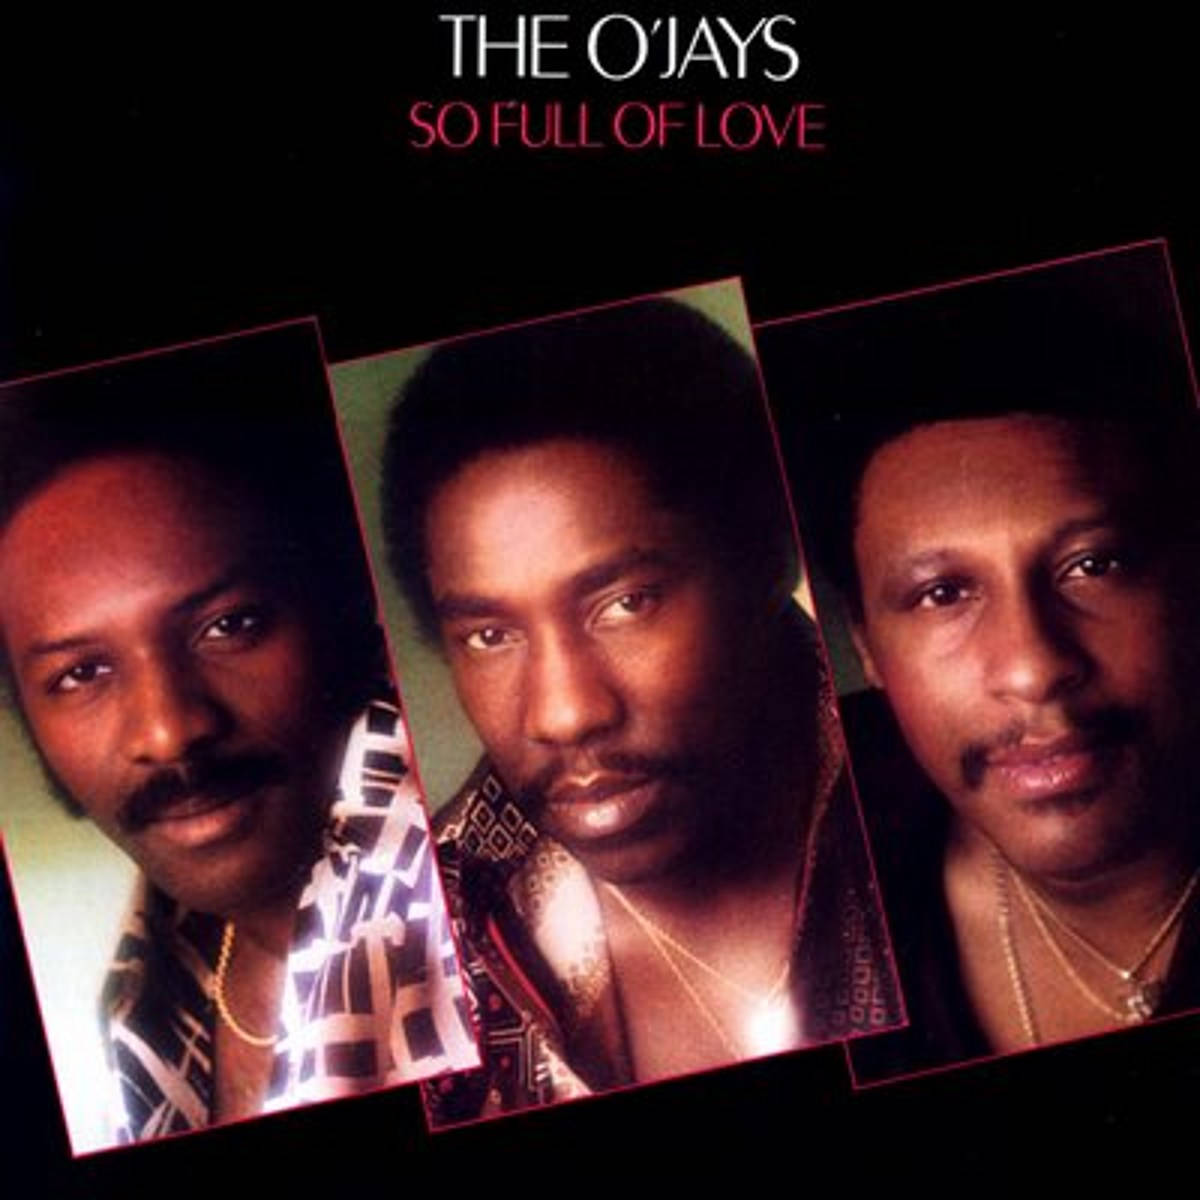 Ojays Official Used Be My Girl Wallpaper